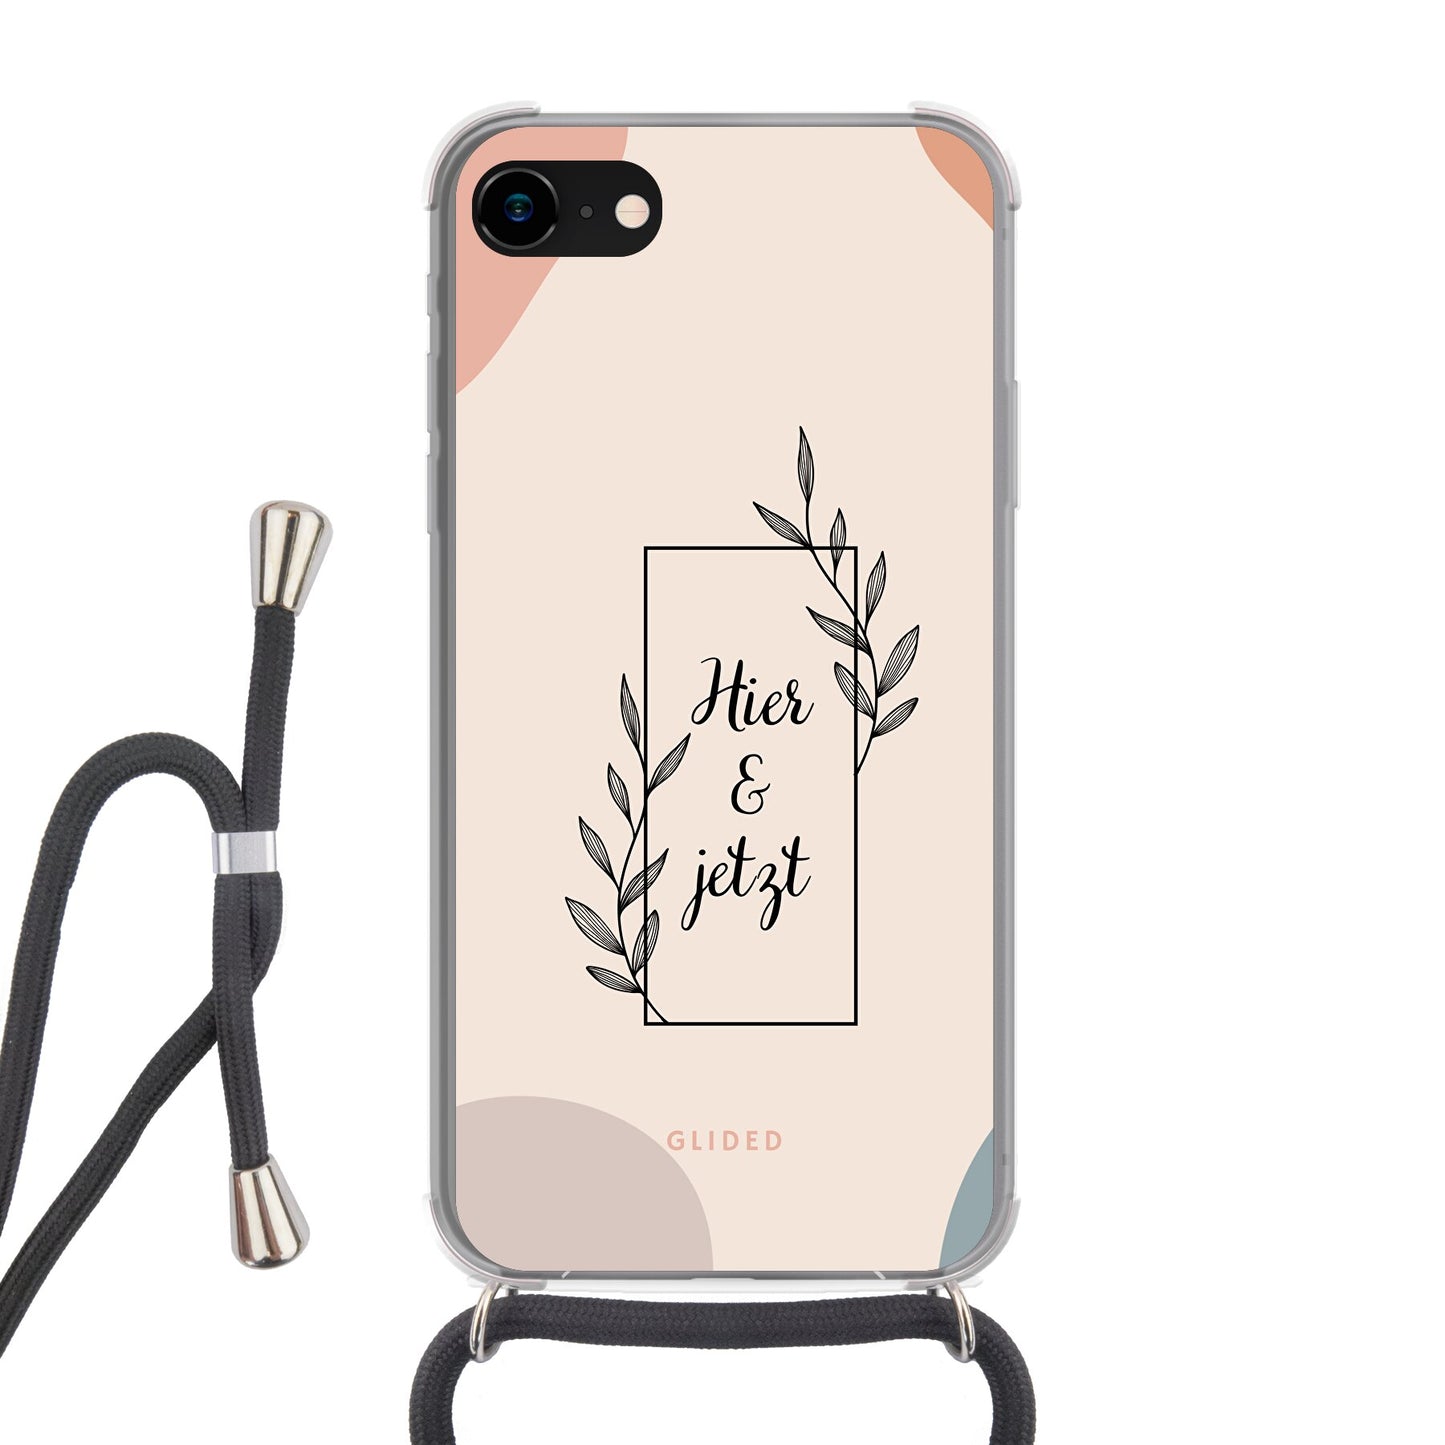 Now - iPhone 7 Handyhülle Crossbody case mit Band